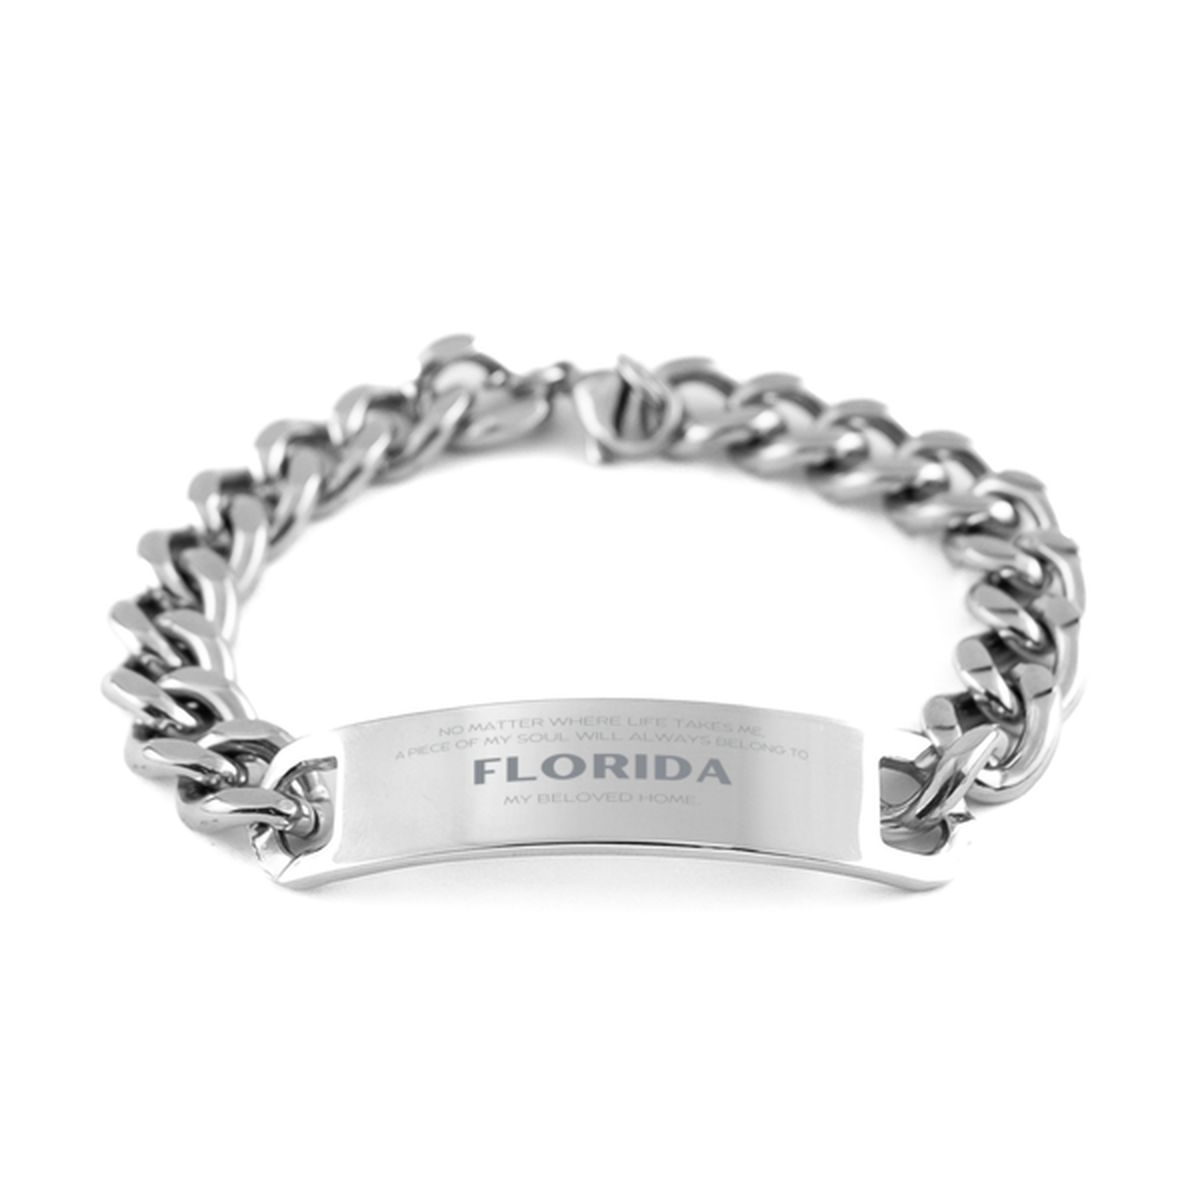 Love Florida State Gifts, My soul will always belong to Florida, Proud Cuban Chain Stainless Steel Bracelet, Birthday Unique Gifts For Florida Men, Women, Friends